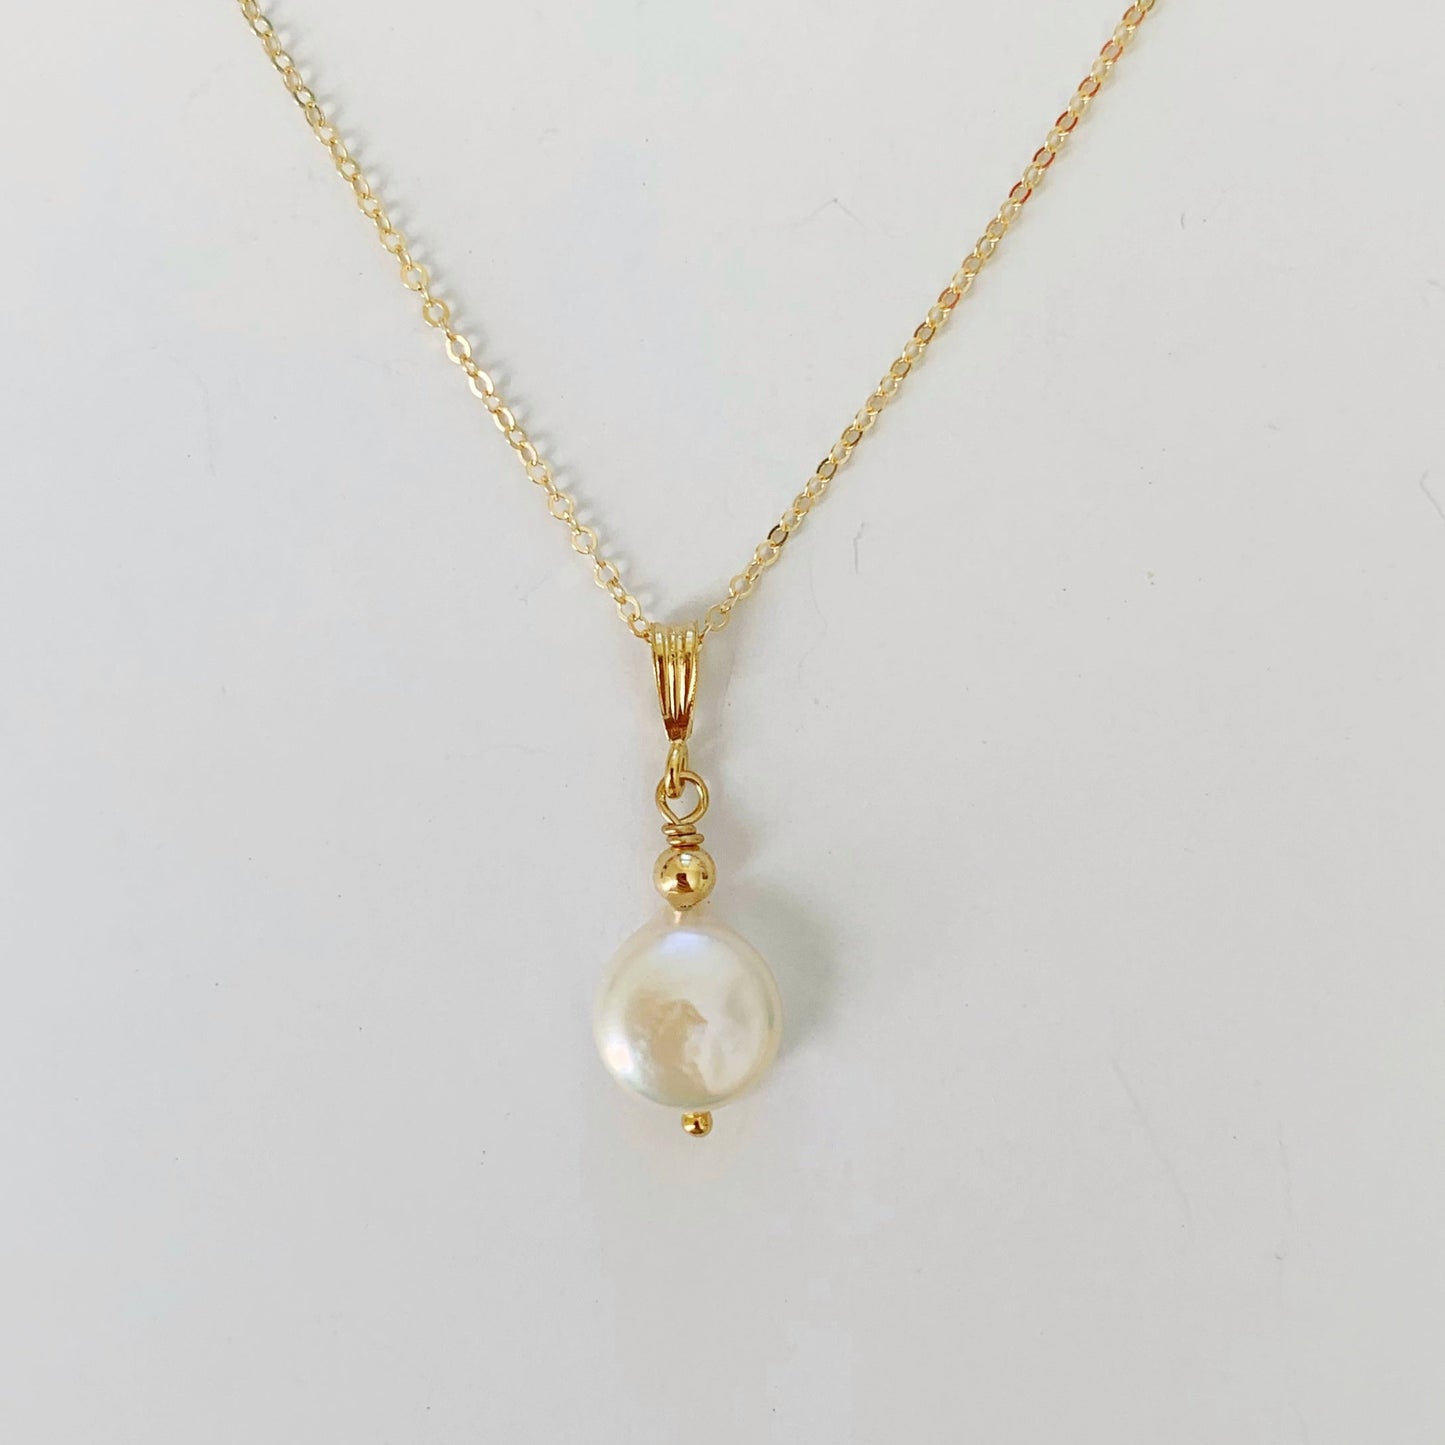 Newport Pearl Necklace is a freshwater coin pearl pendant with 14k gold filled findings and chain. this one is photographed on a white background